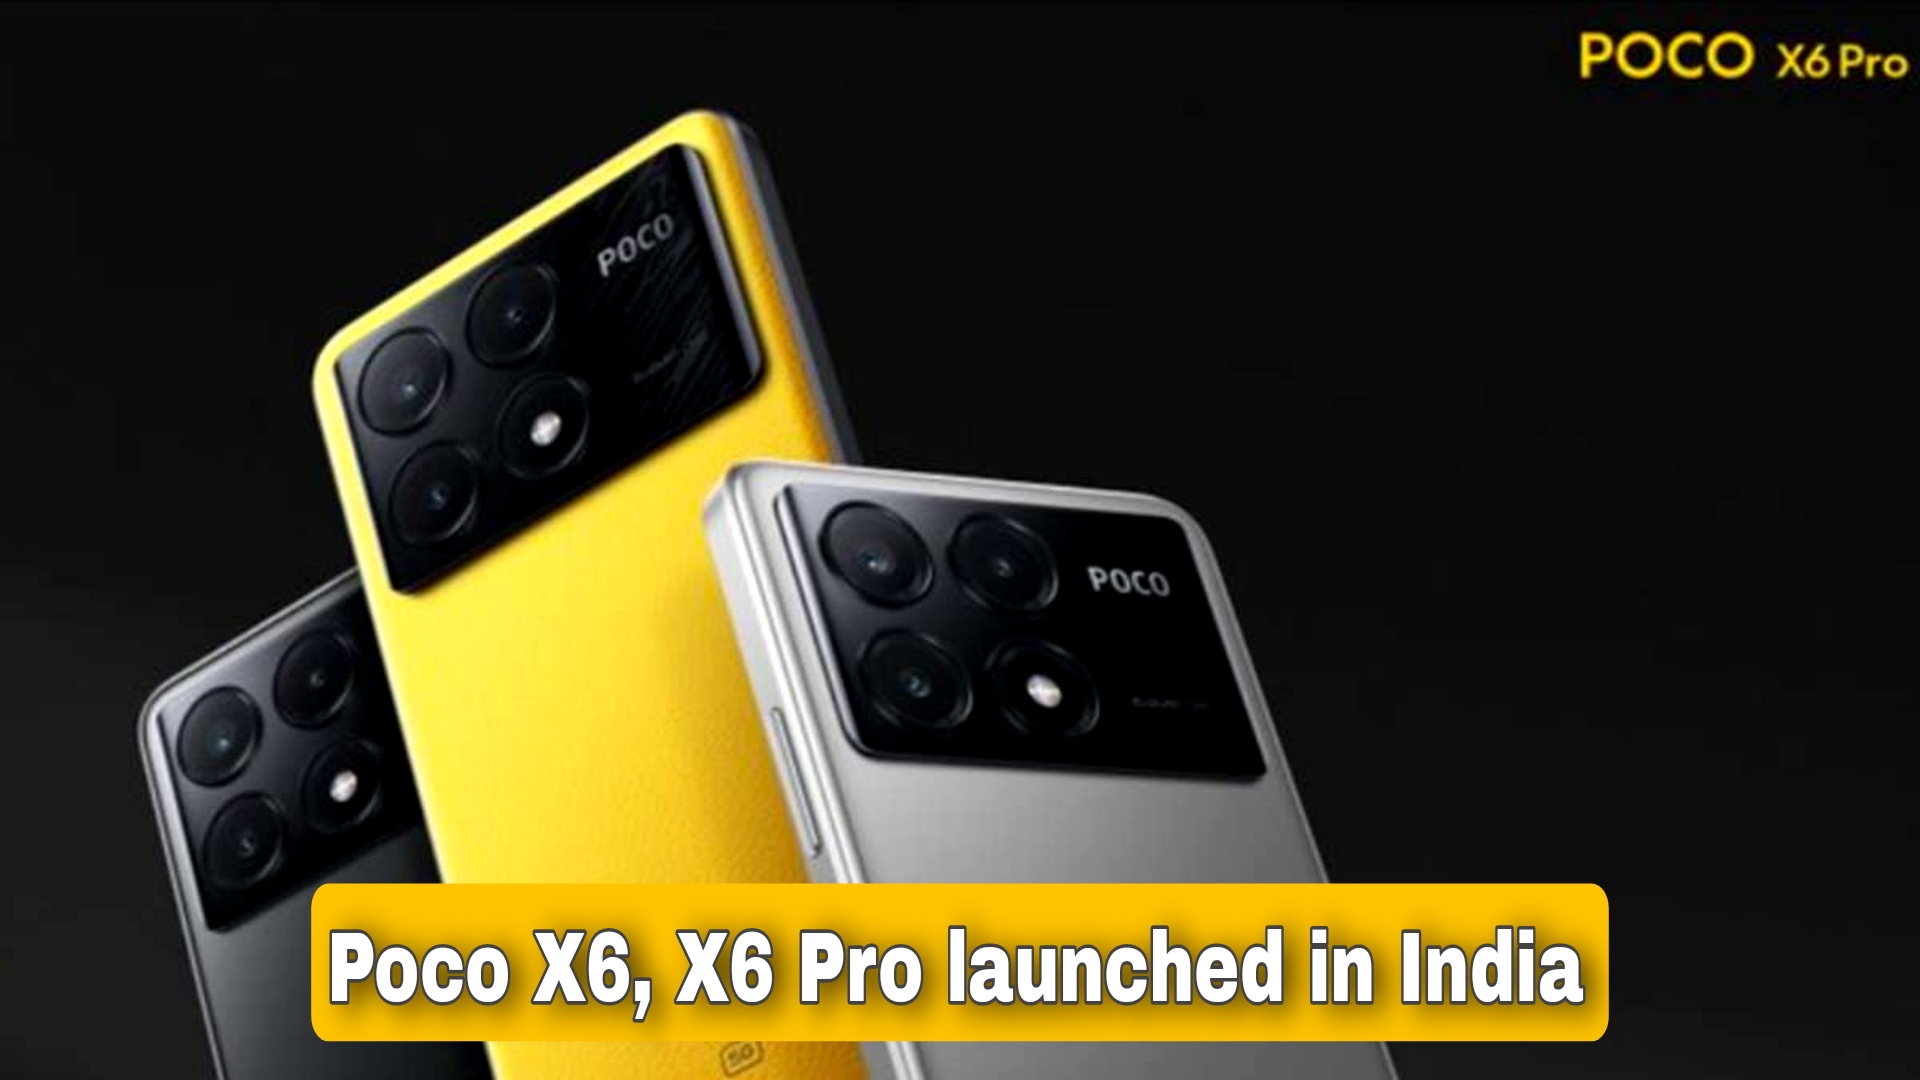 Poco X6, X6 Pro launched in India